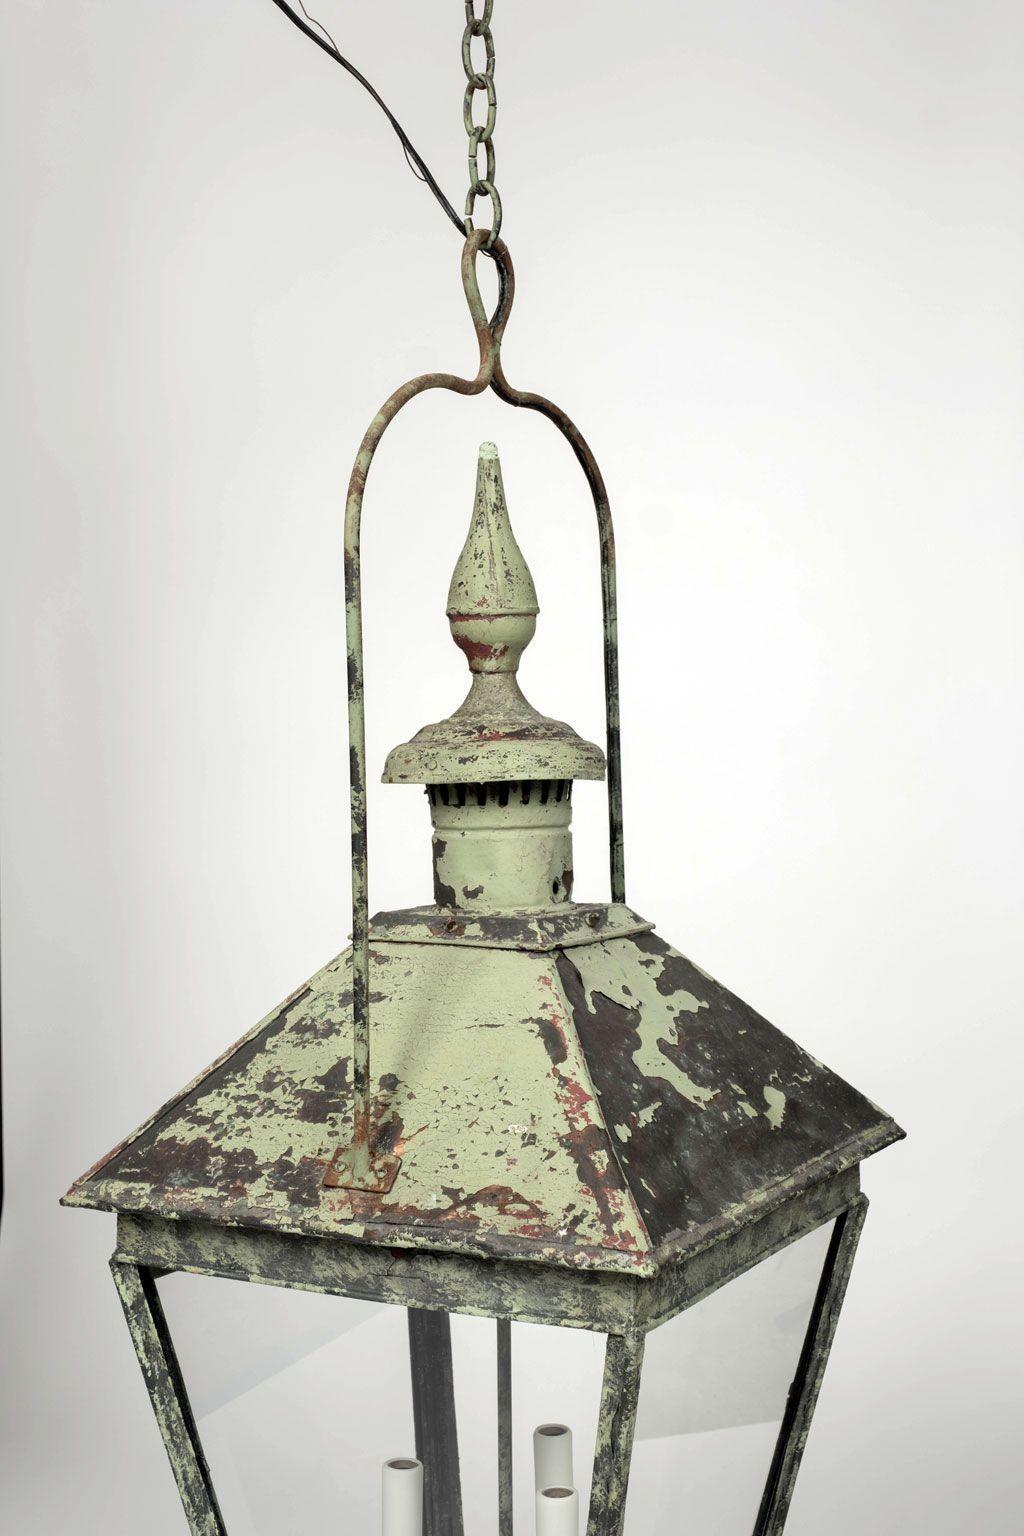 Hand-Painted 19th Century French Green-Painted Copper and Glass Paneled Lantern For Sale